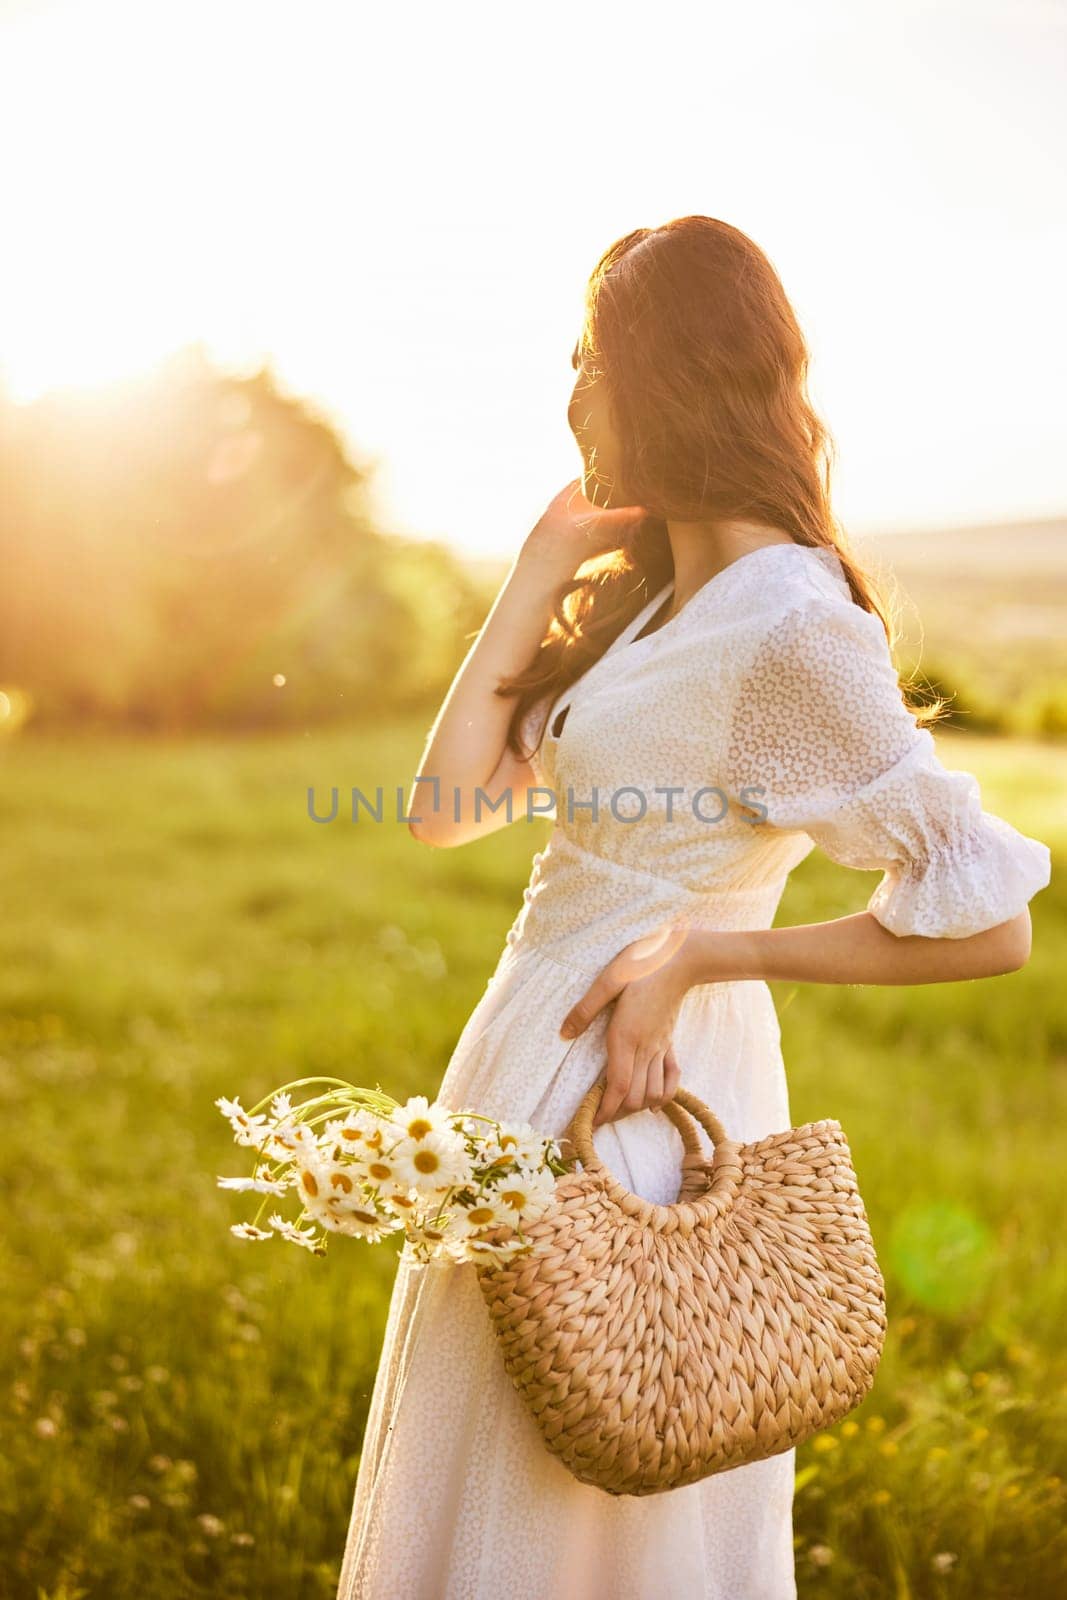 girl in a light summer dress with a basket of flowers in her hands with glare from the setting sun. High quality photo